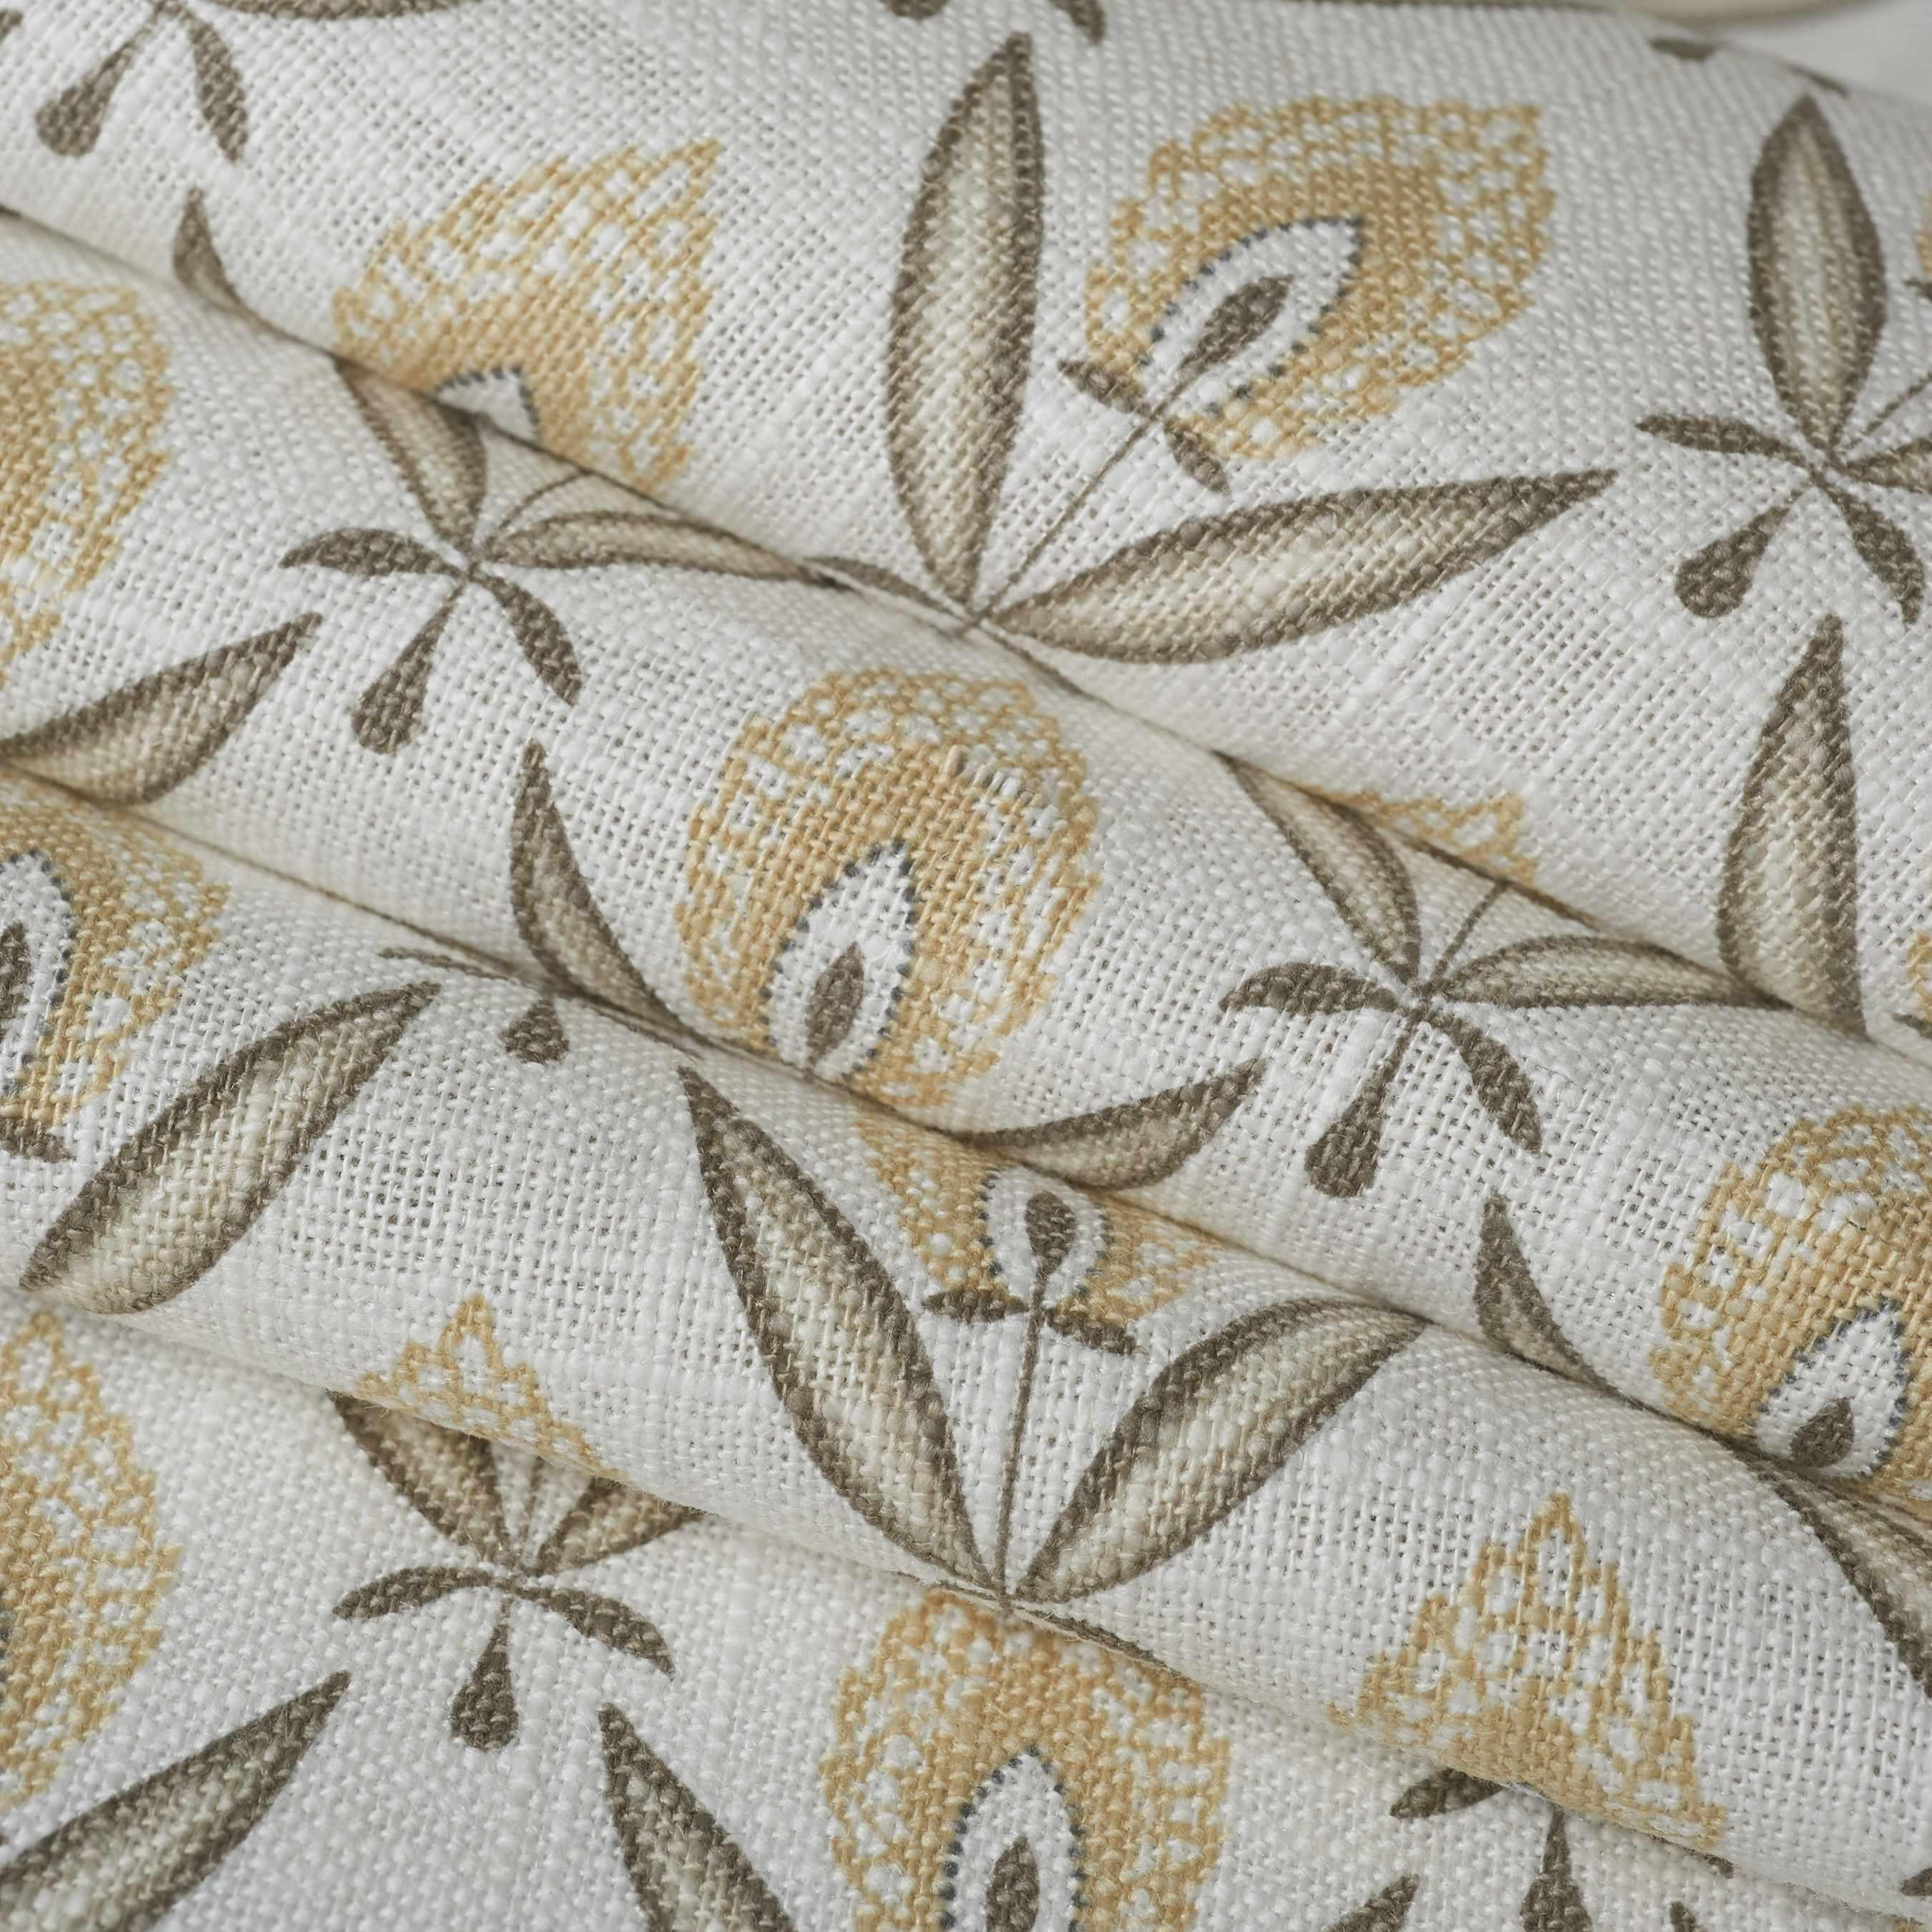 Home Decorative Fabric Linen - Darcy Bisque